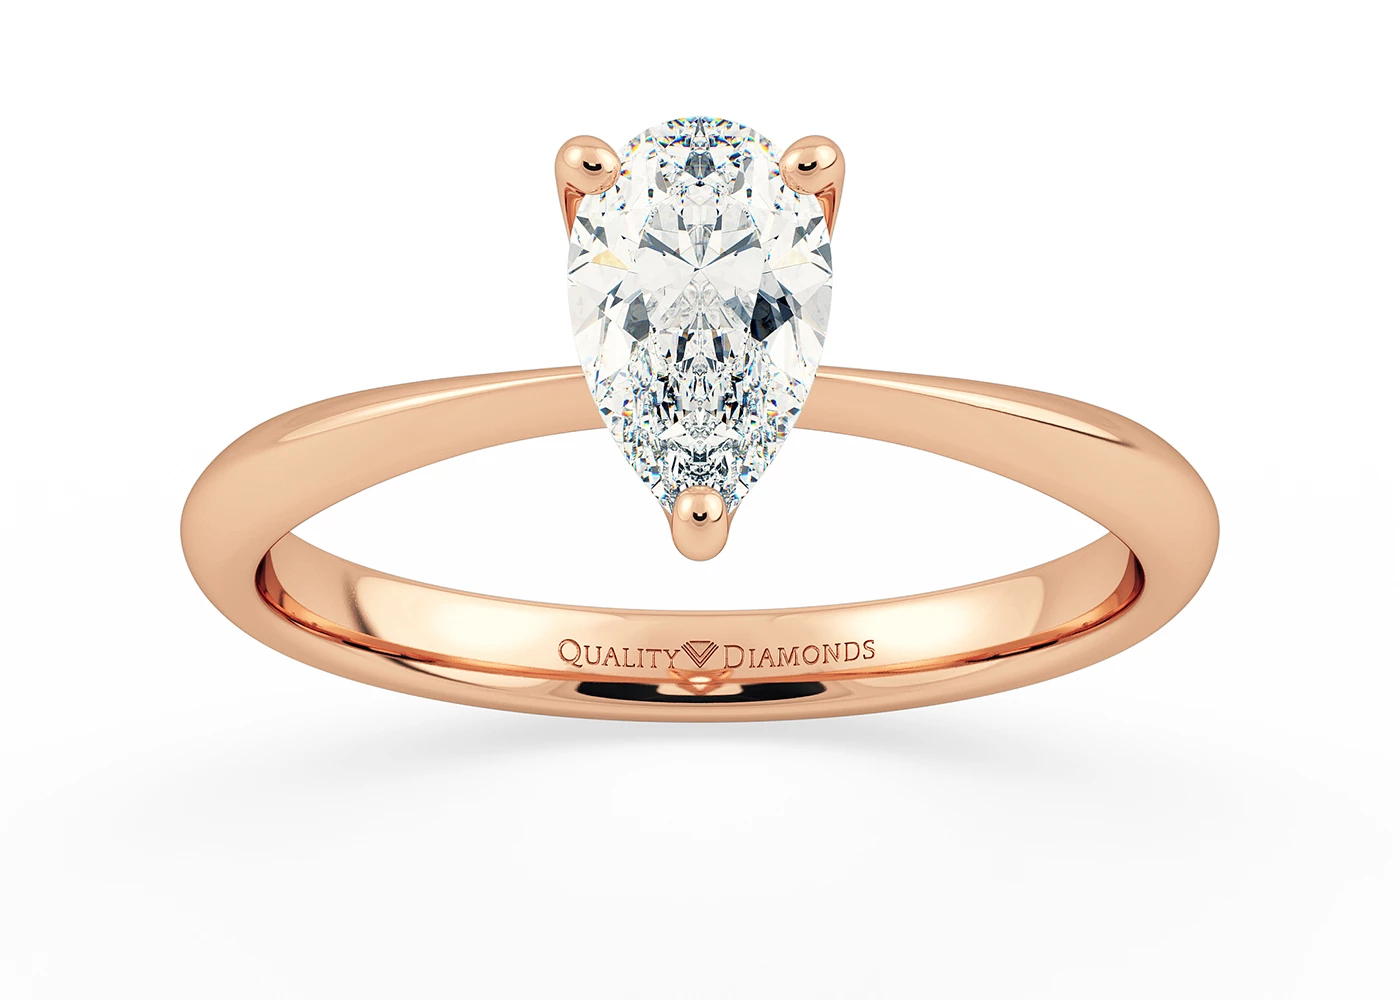 One Carat Pear Solitaire Diamond Engagement Ring in 18K Rose Gold